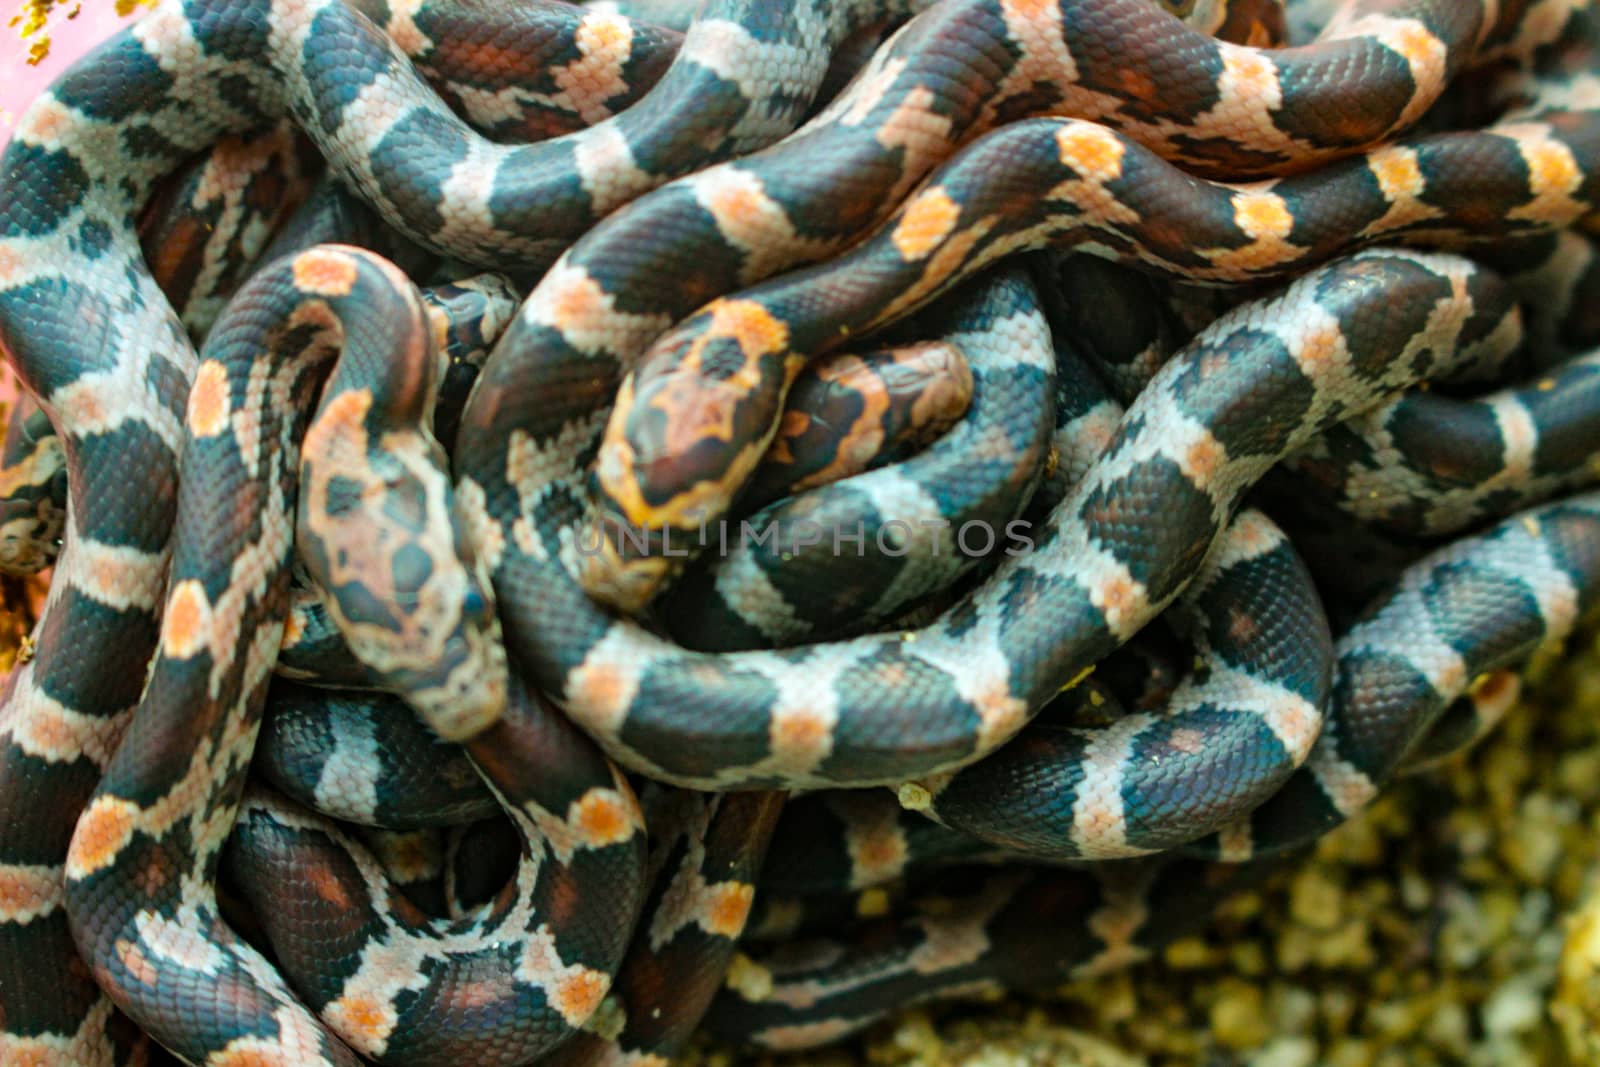 Pile of baby corn snakes